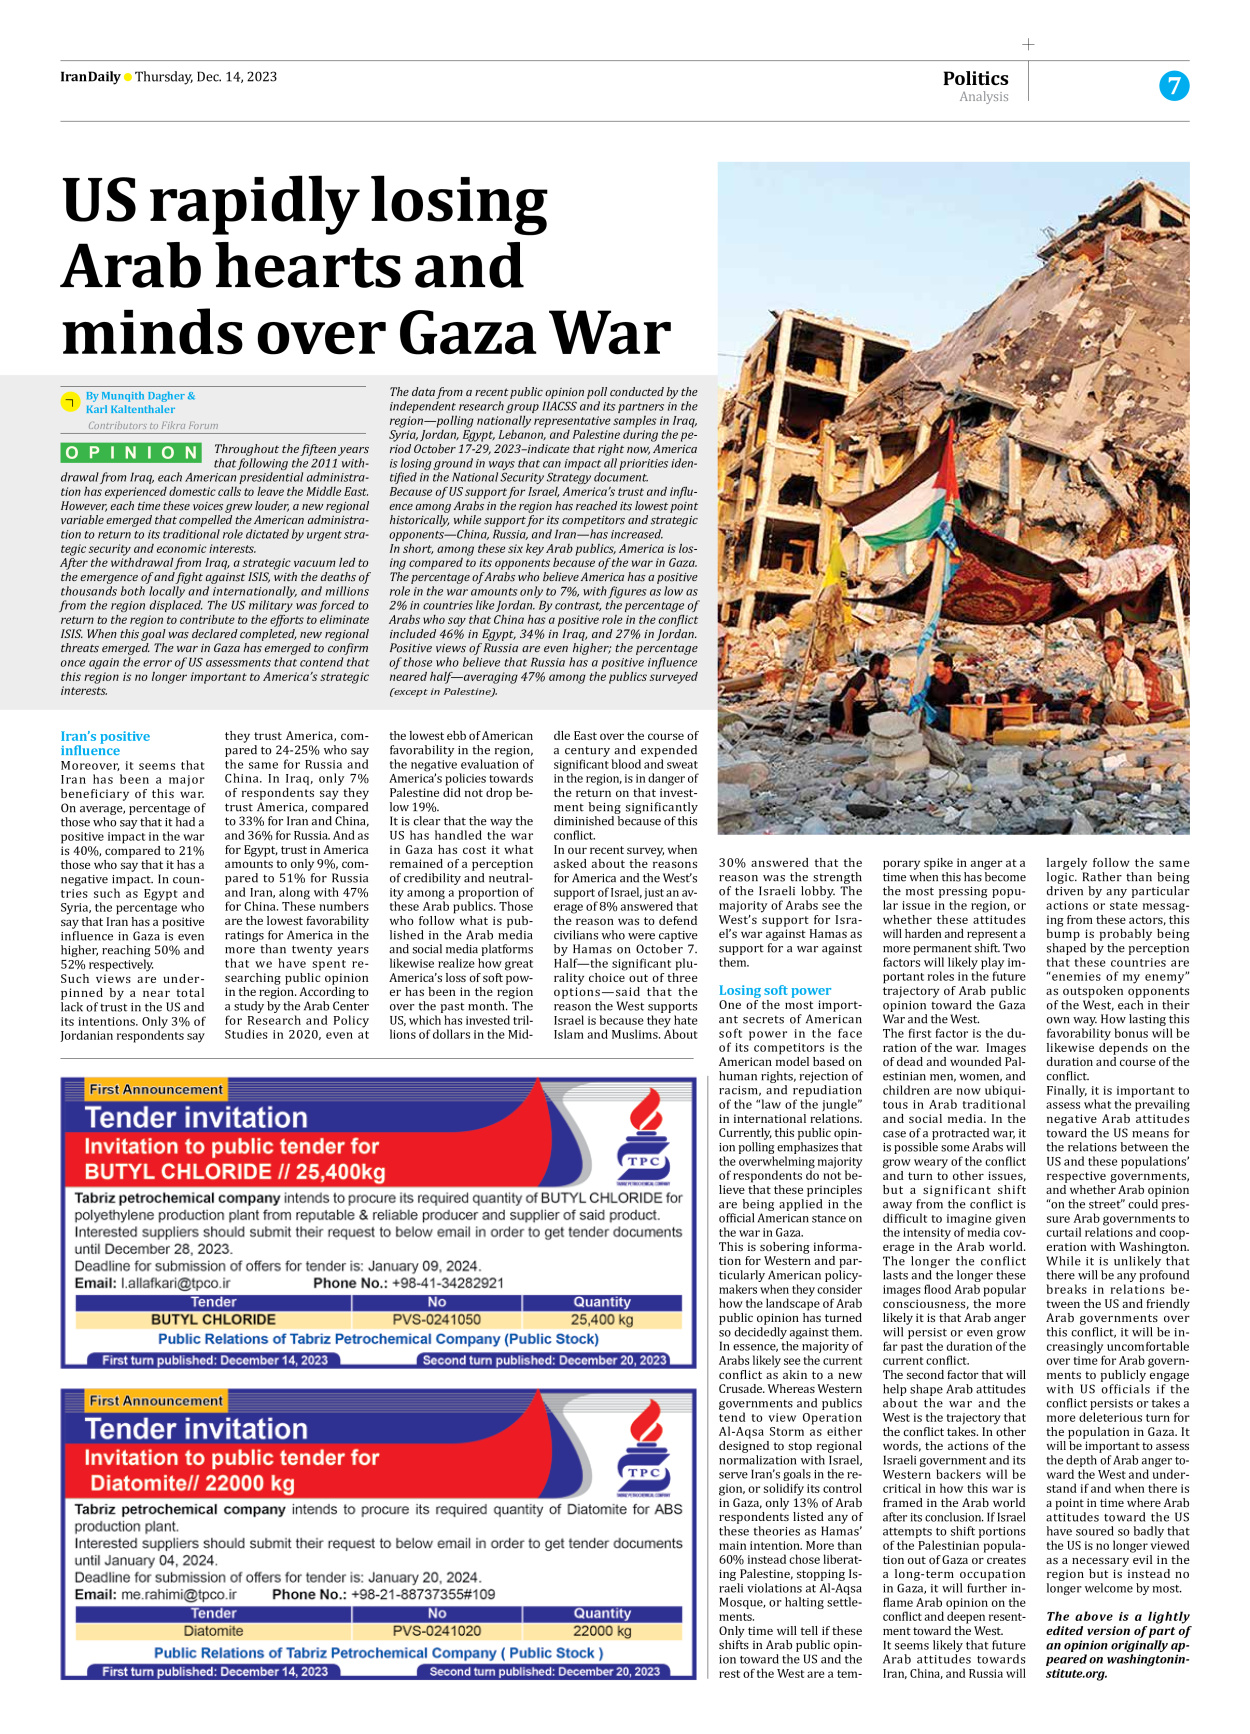 Iran Daily - Number Seven Thousand Four Hundred and Sixty - 14 December 2023 - Page 7